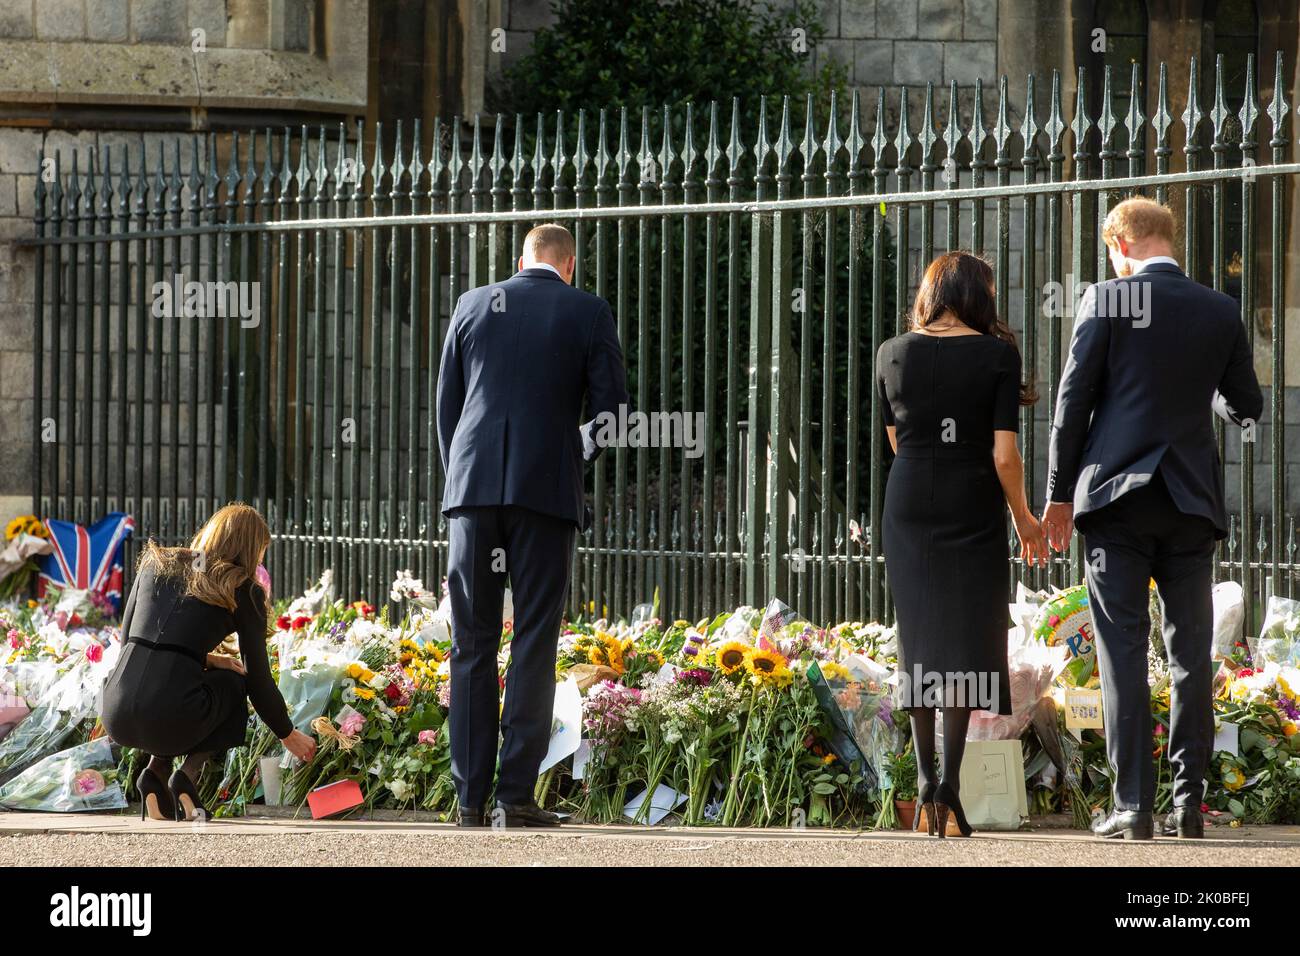 Windsor, UK. 10th September, 2022. Prince William and Catherine, the new Prince and Princess of Wales, accompanied by Prince Harry and Meghan, the Duke and Duchess of Sussex, view floral tributes laid outside Cambridge Gate at Windsor Castle following the death of Queen Elizabeth II. Queen Elizabeth II, the UK's longest-serving monarch, died at Balmoral aged 96 on 8th September 2022 after a reign lasting 70 years. Credit: Mark Kerrison/Alamy Live News Stock Photo